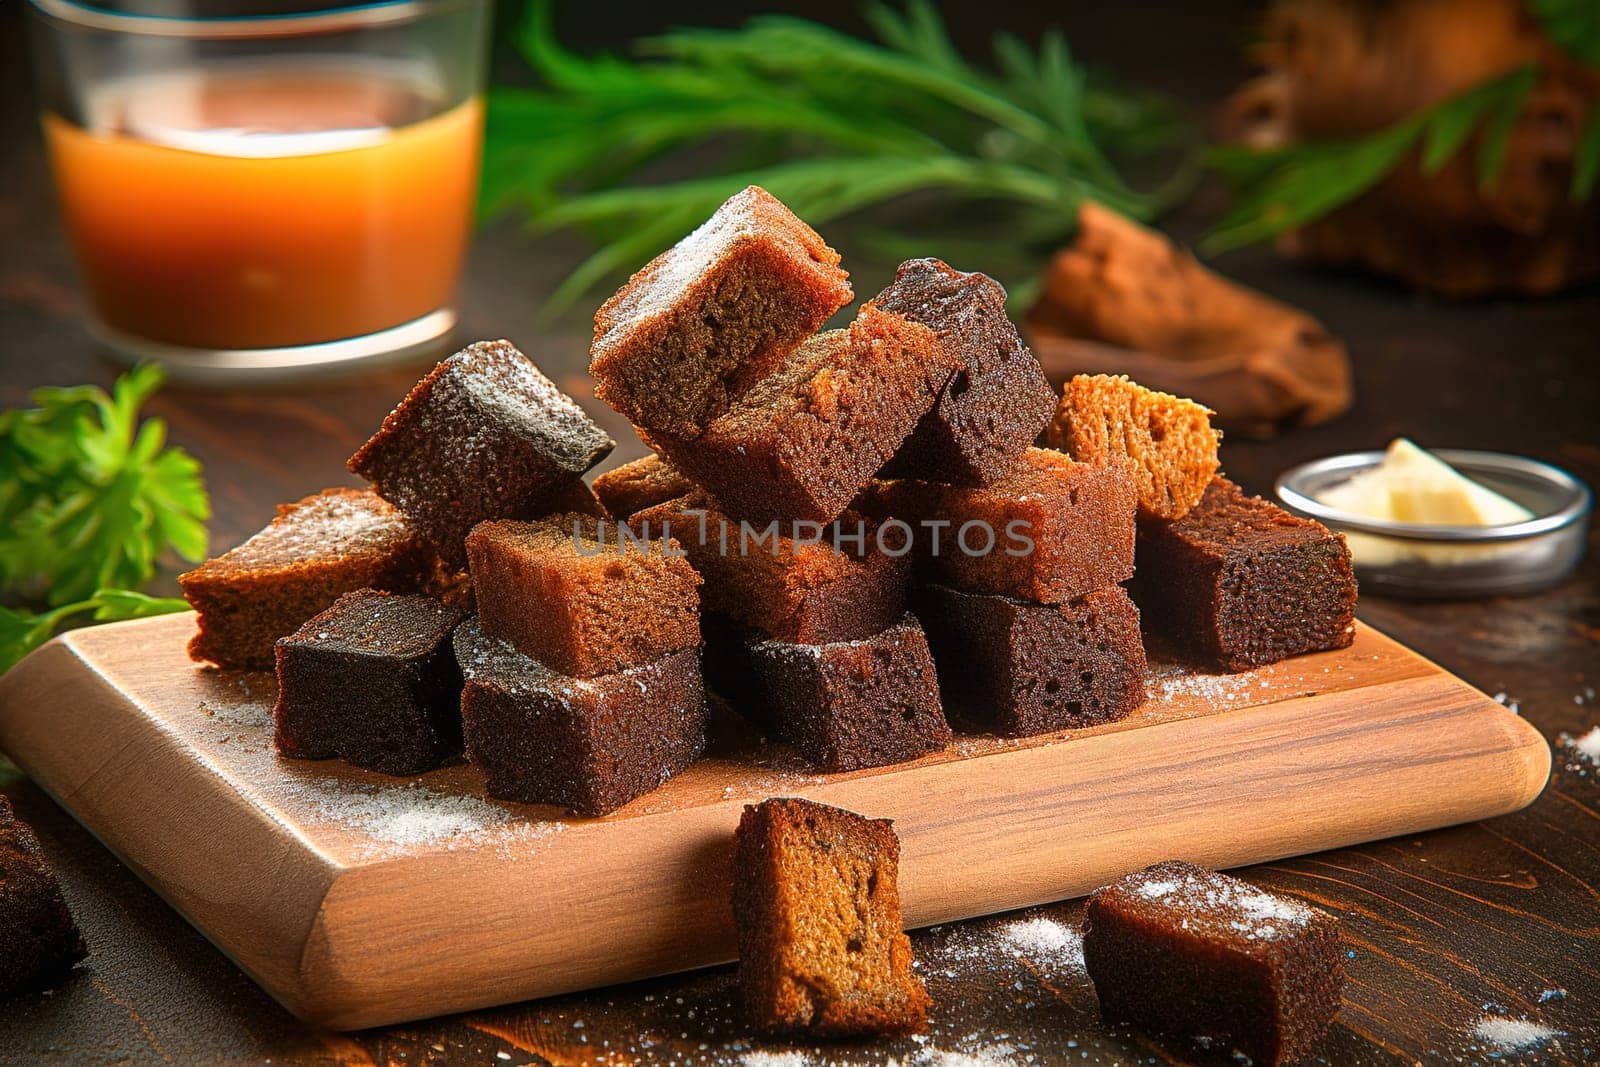 Borodino croutons, crackers, fried slices of black bread in oil. by Yurich32